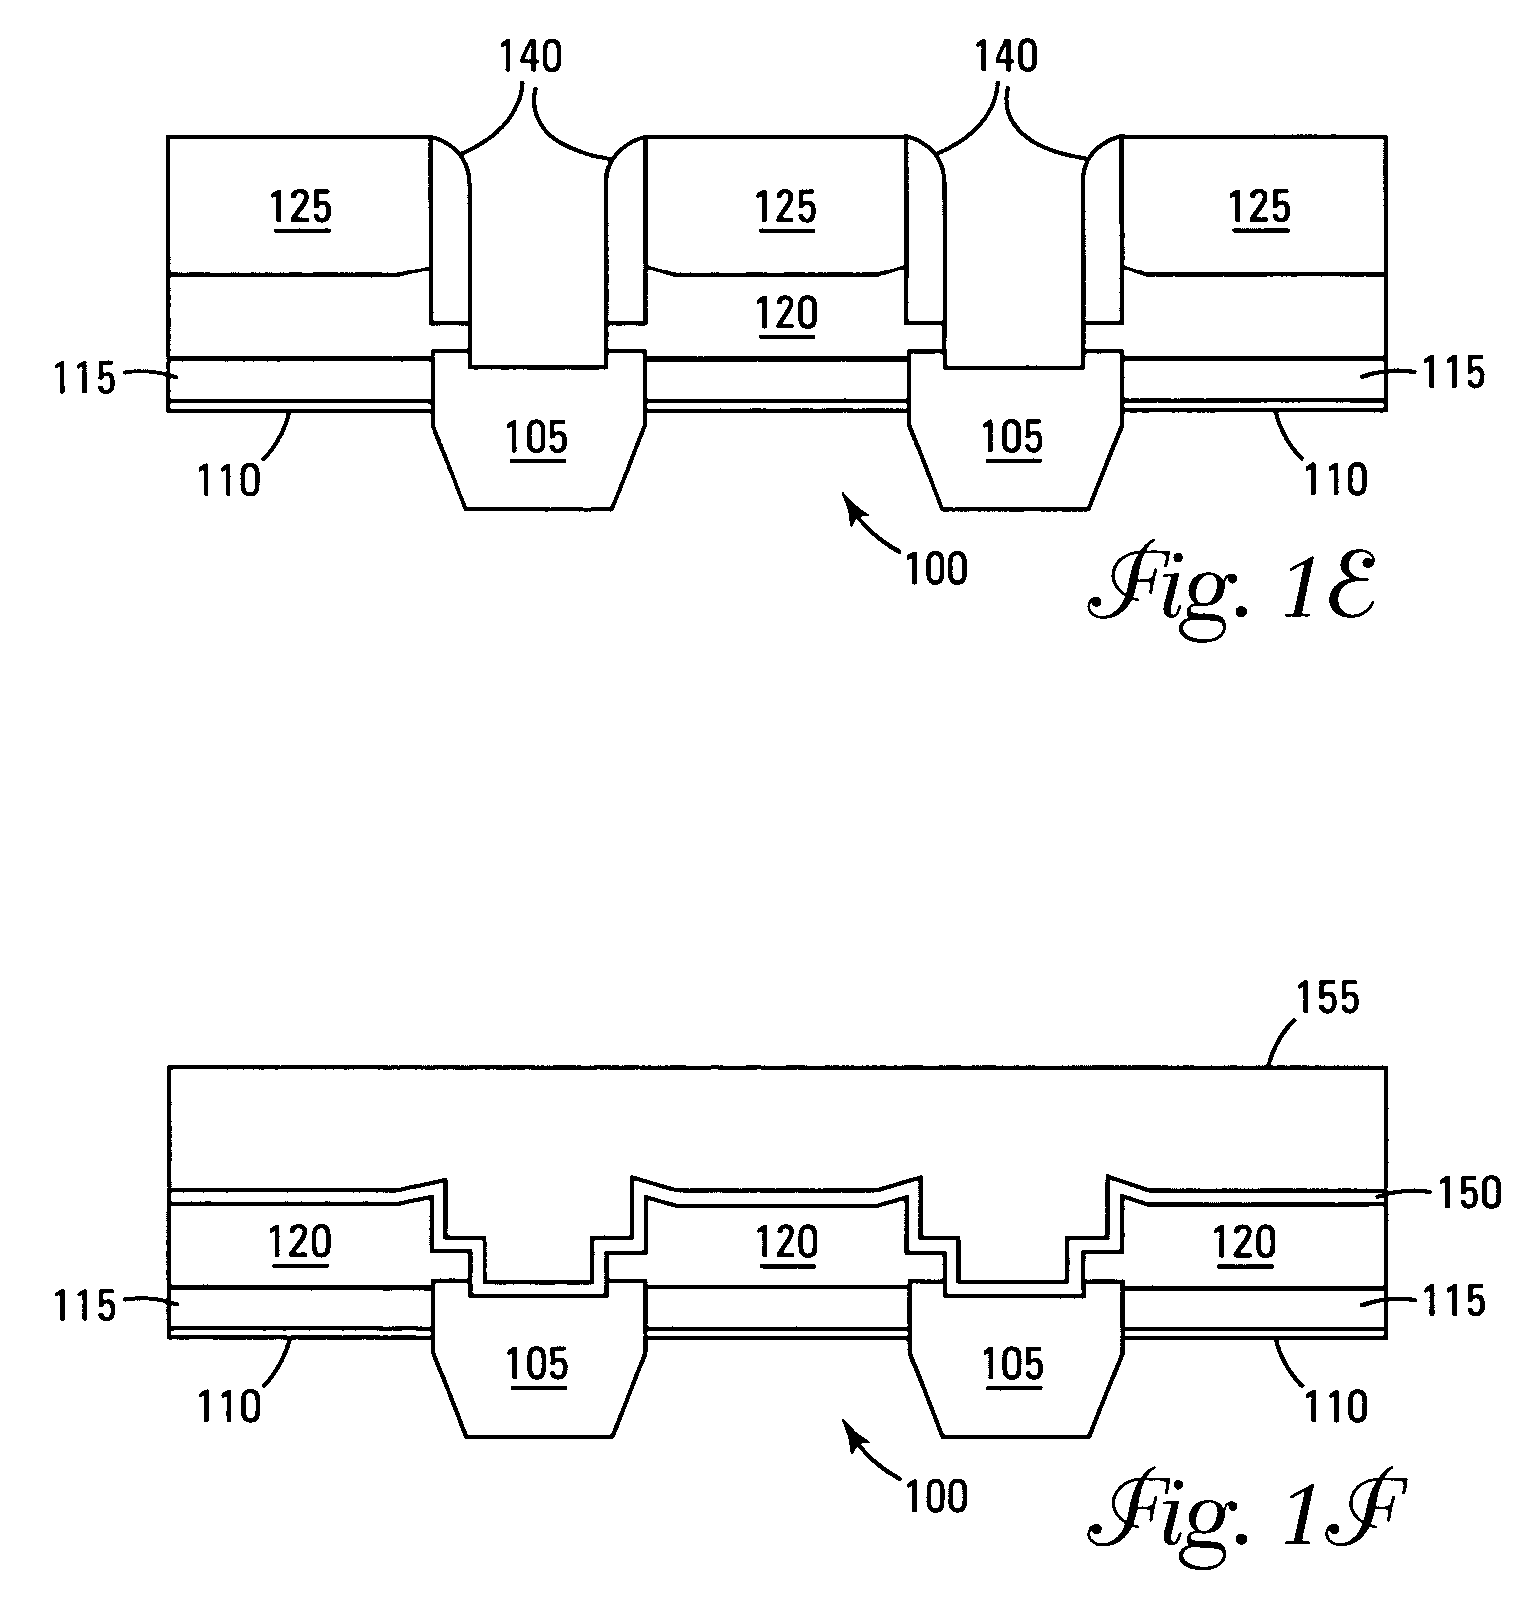 Gate coupling in floating-gate memory cells